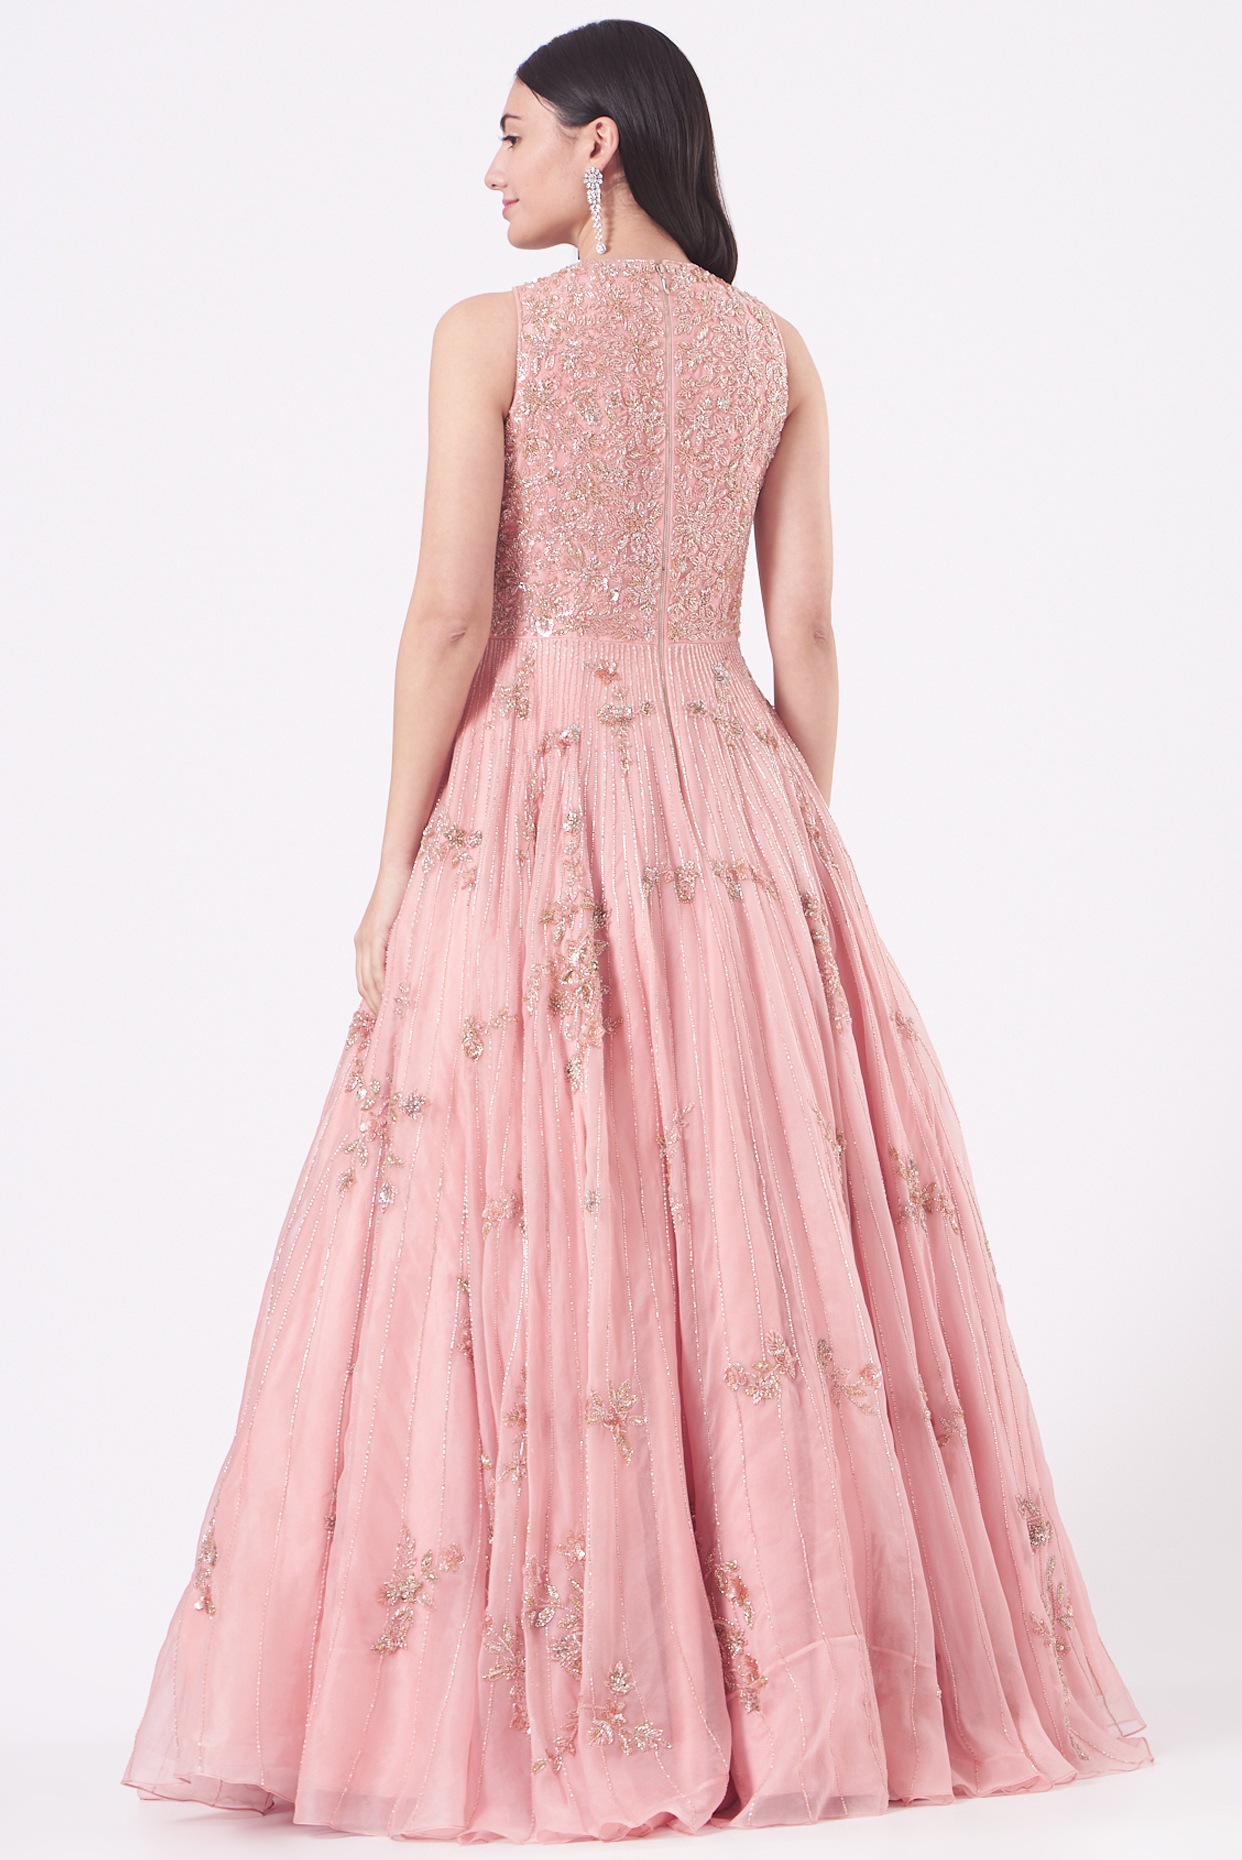 Pastel Green Classic Tulle Gown Set with Hand-Embroidered Floral Motifs and  Bodice - Seasons India